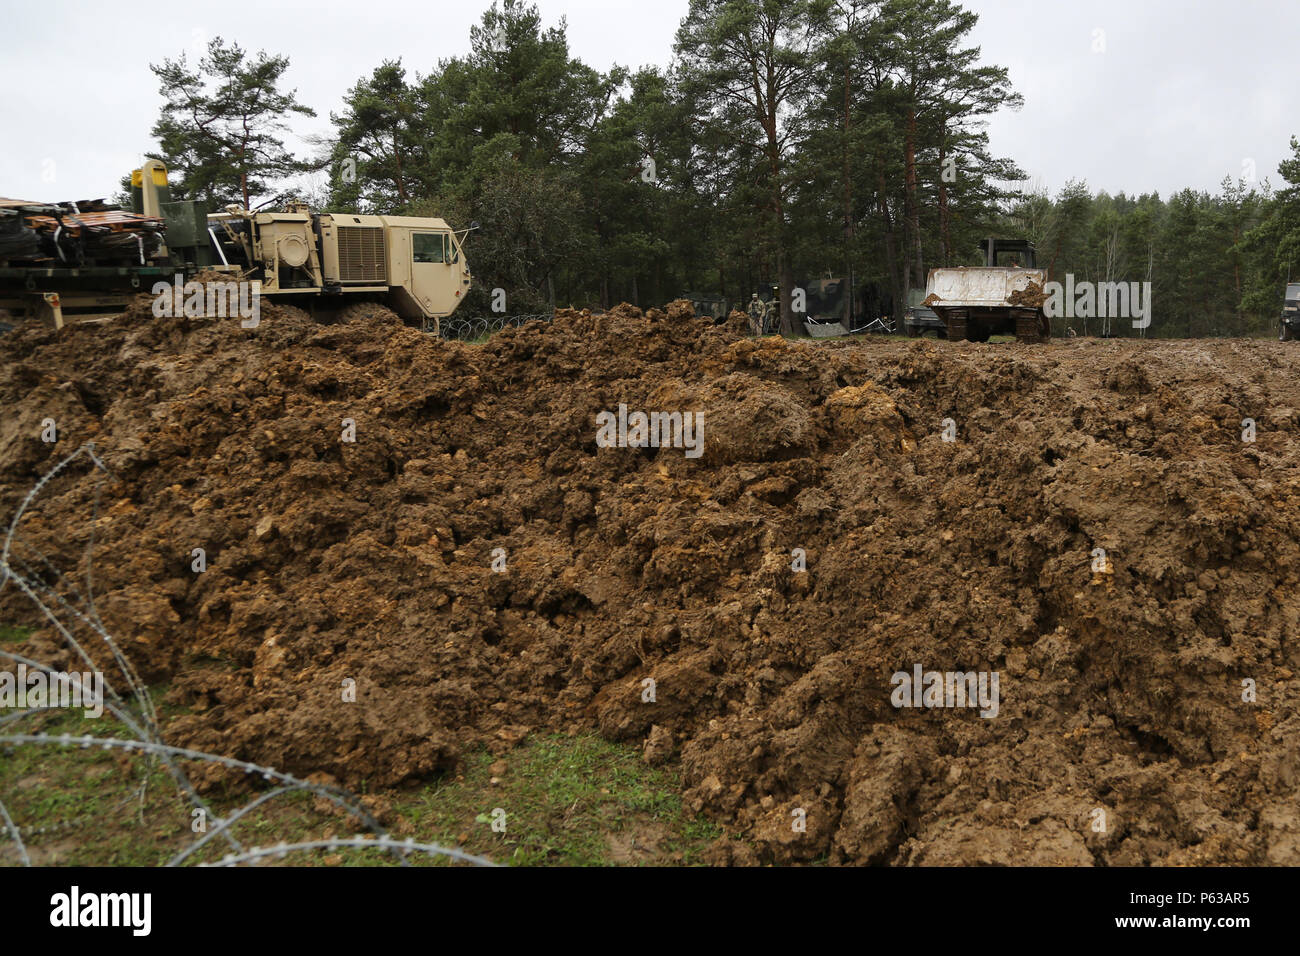 U.S. Soldiers of Fox Company, 4th Battalion, 319th Airborne Field Artillery Regiment, 173rd Airborne Brigade build a berm while constructing defensive obstacles during exercise Saber Junction 16 at the U.S. Army’s Joint Multinational Readiness Center (JMRC) in Hohenfels, Germany, April 17, 2016. Saber Junction 16 is the U.S. Army Europe’s 173rd Airborne Brigade’s combat training center certification exercise, taking place at the JMRC in Hohenfels, Germany, Mar. 31-Apr. 24, 2016.  The exercise is designed to evaluate the readiness of the Army’s Europe-based combat brigades to conduct unified la Stock Photo